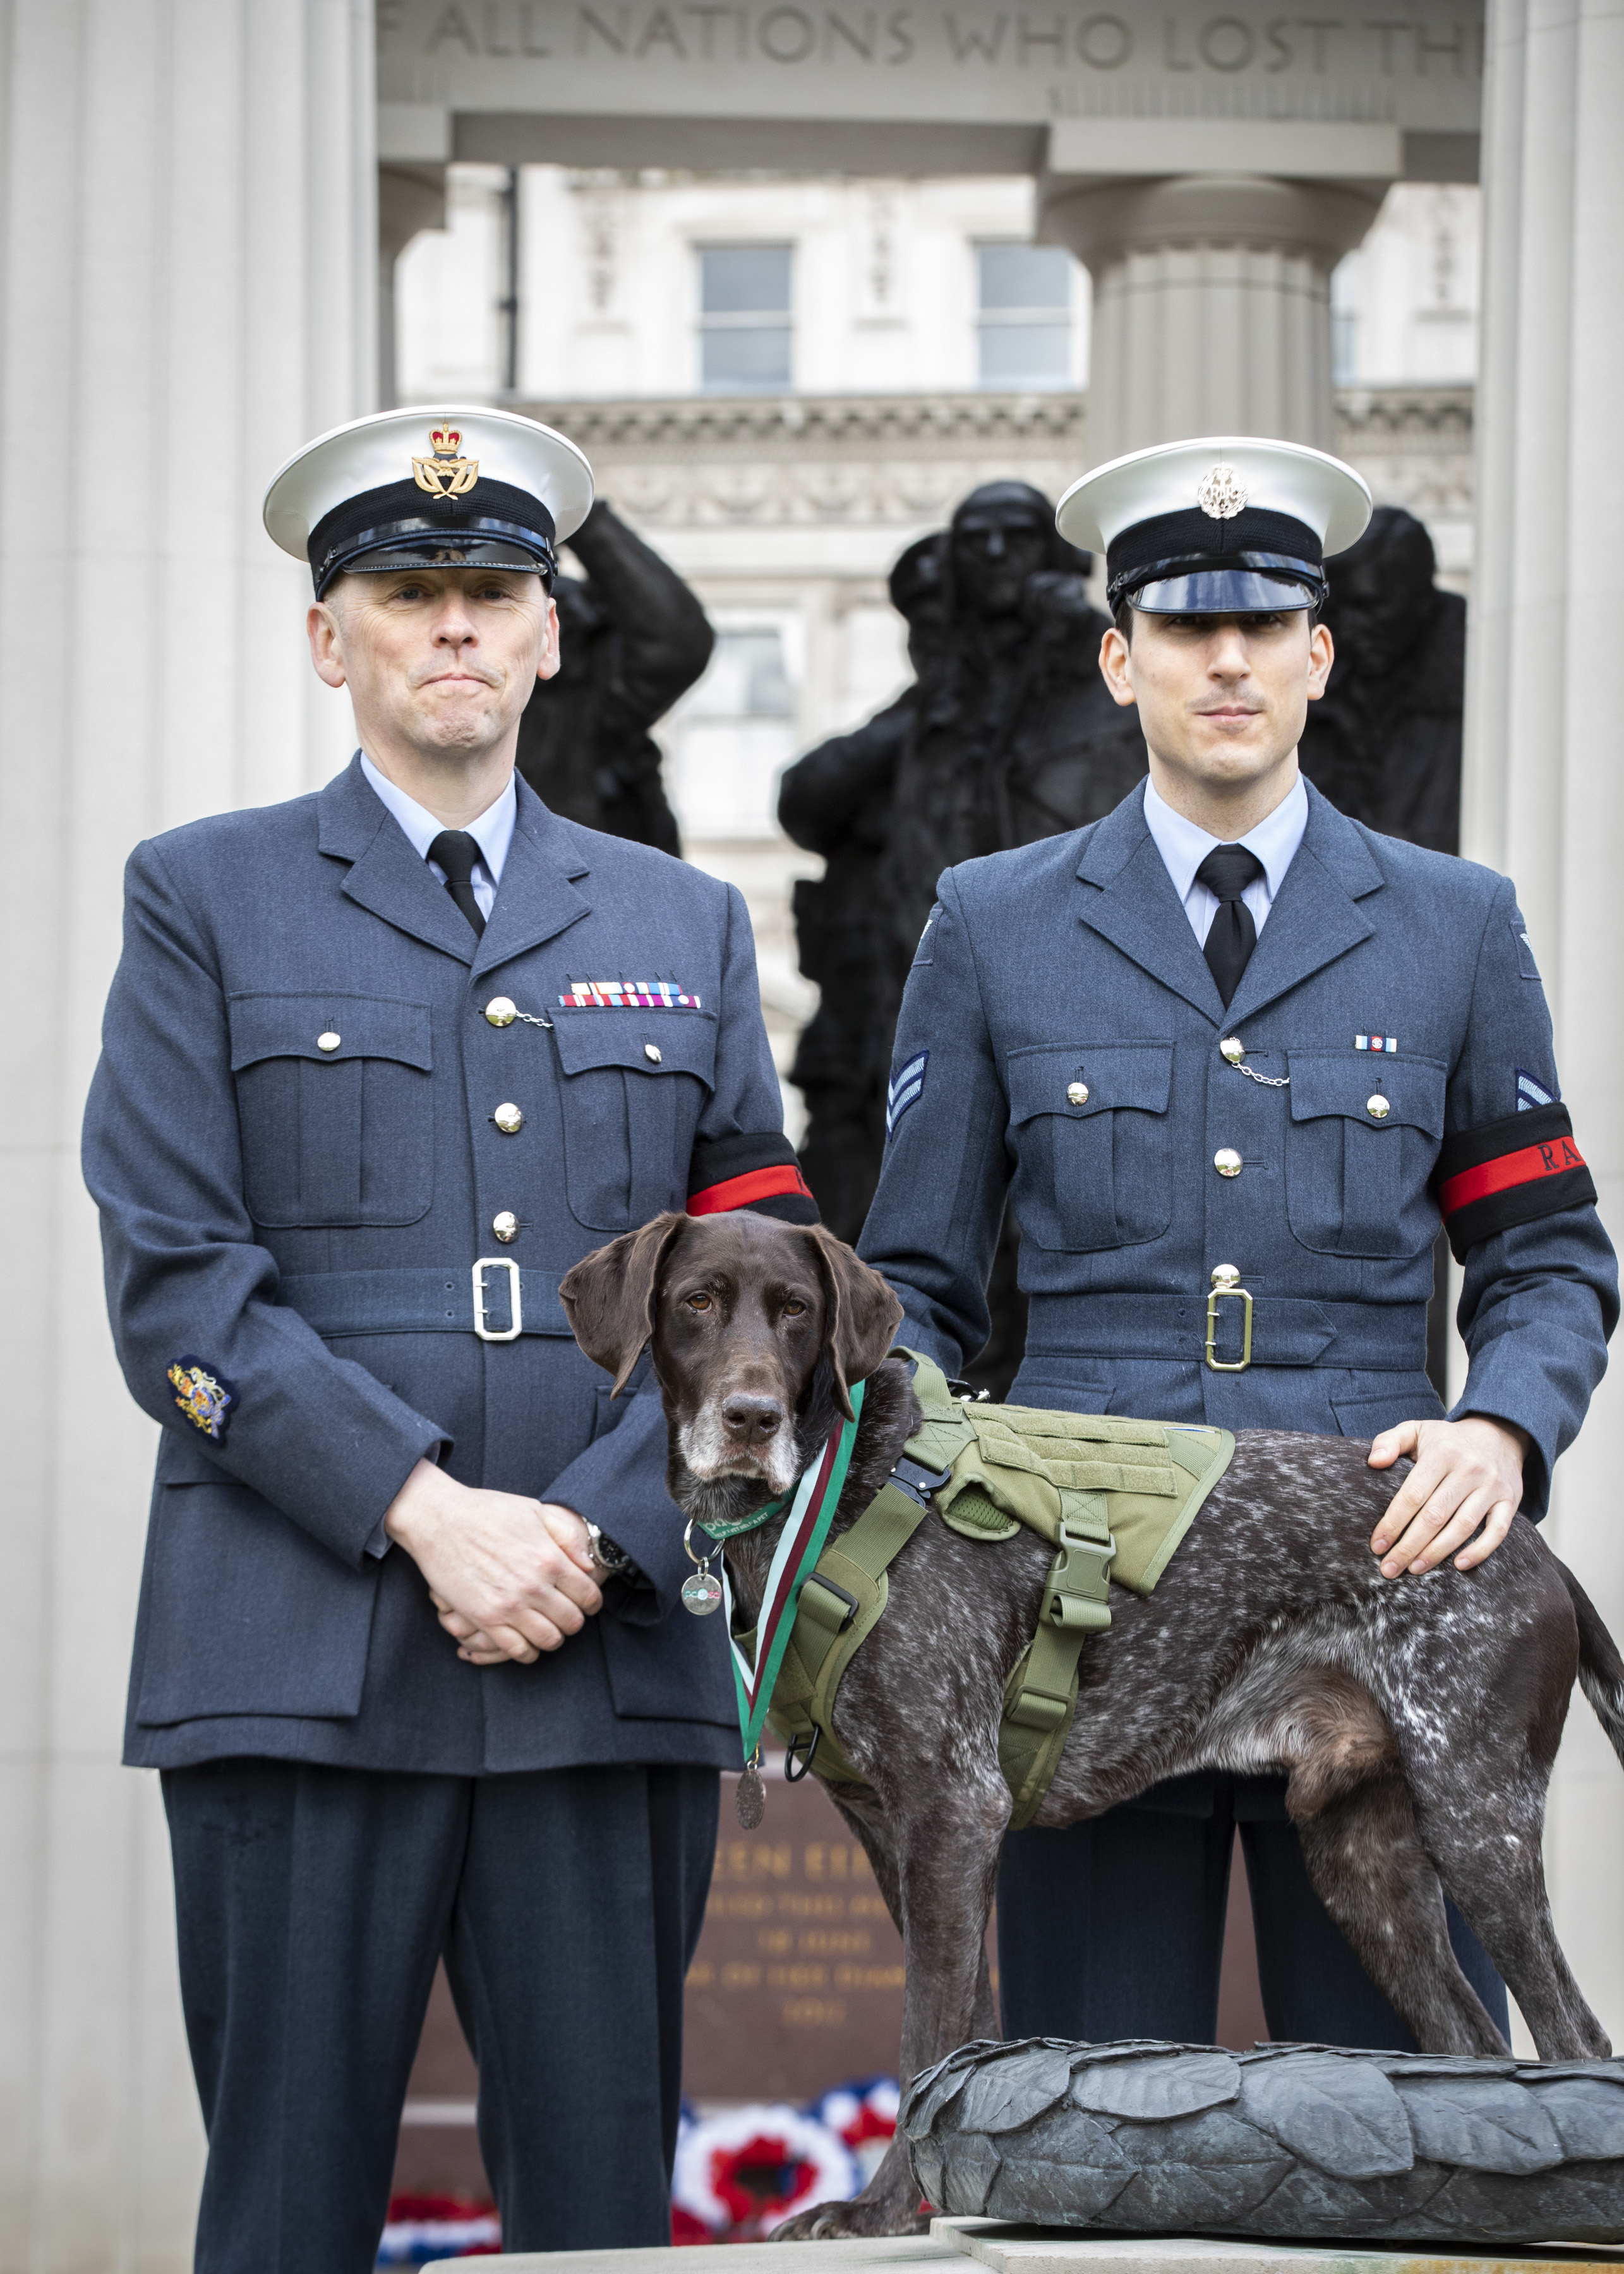 Personnel stand with dog wearing medal.